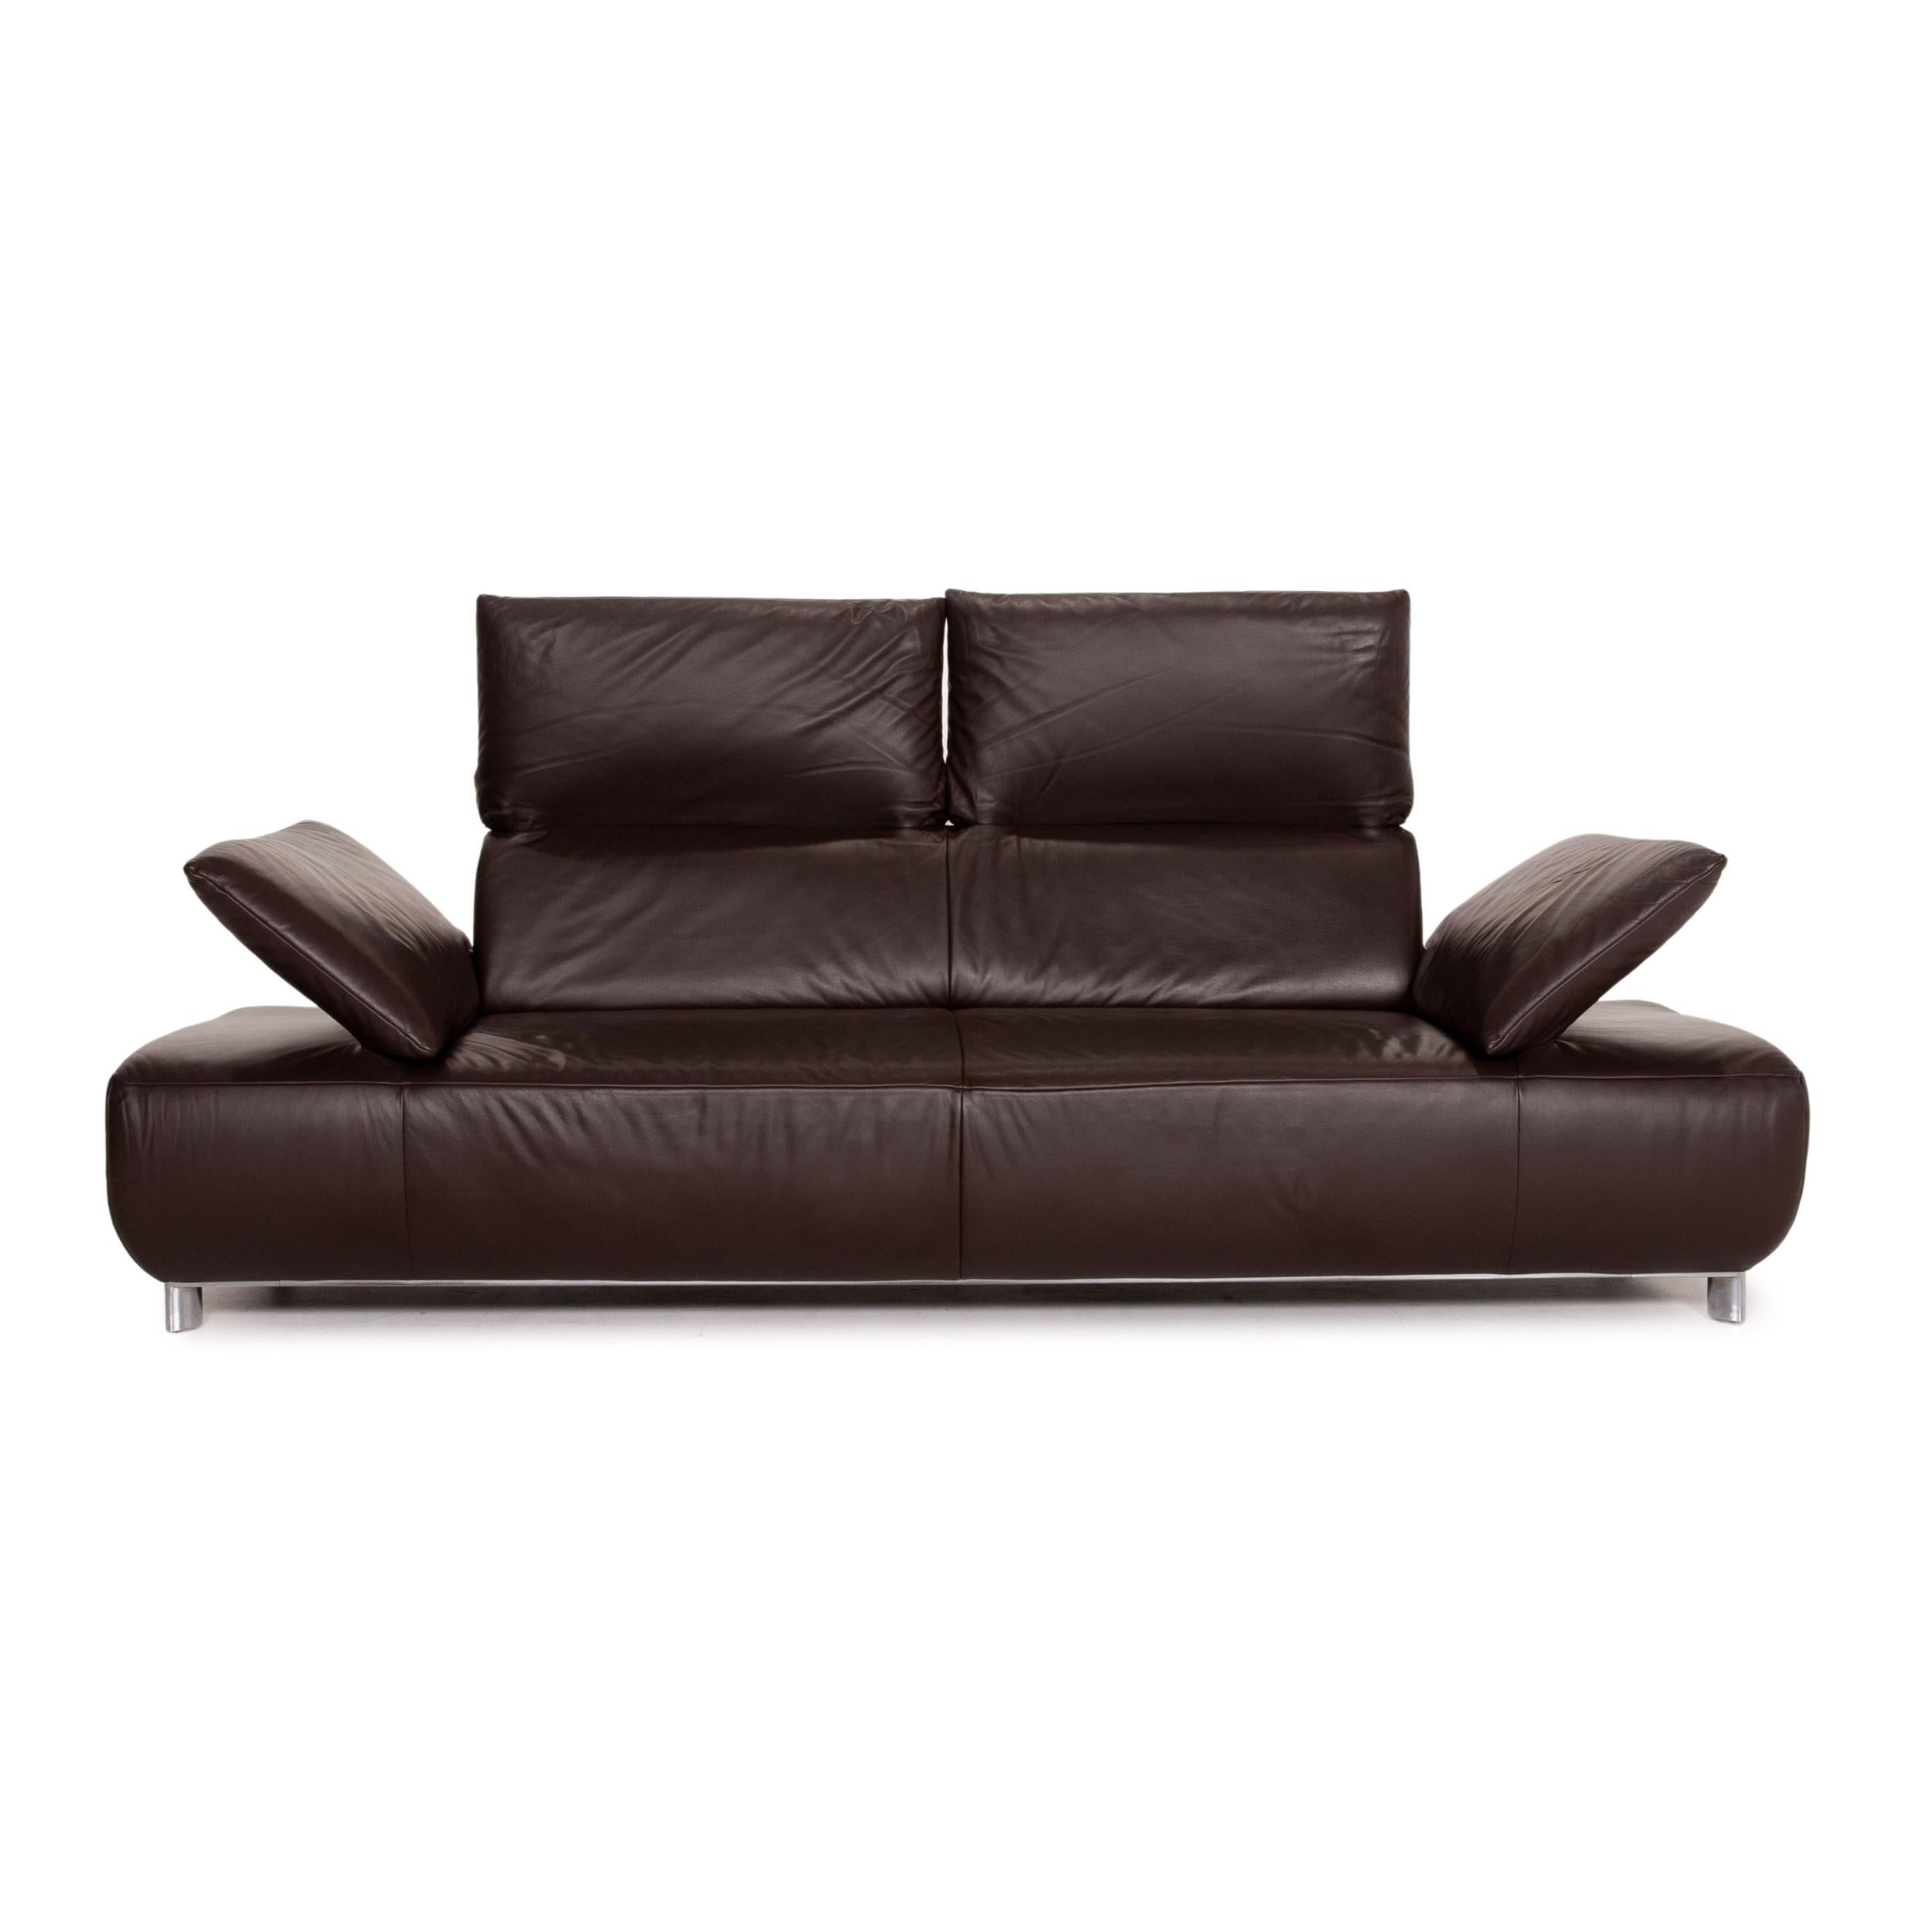 Modern Koinor Volare Leather Sofa Brown Dark Brown Three-Seat Function Couch For Sale